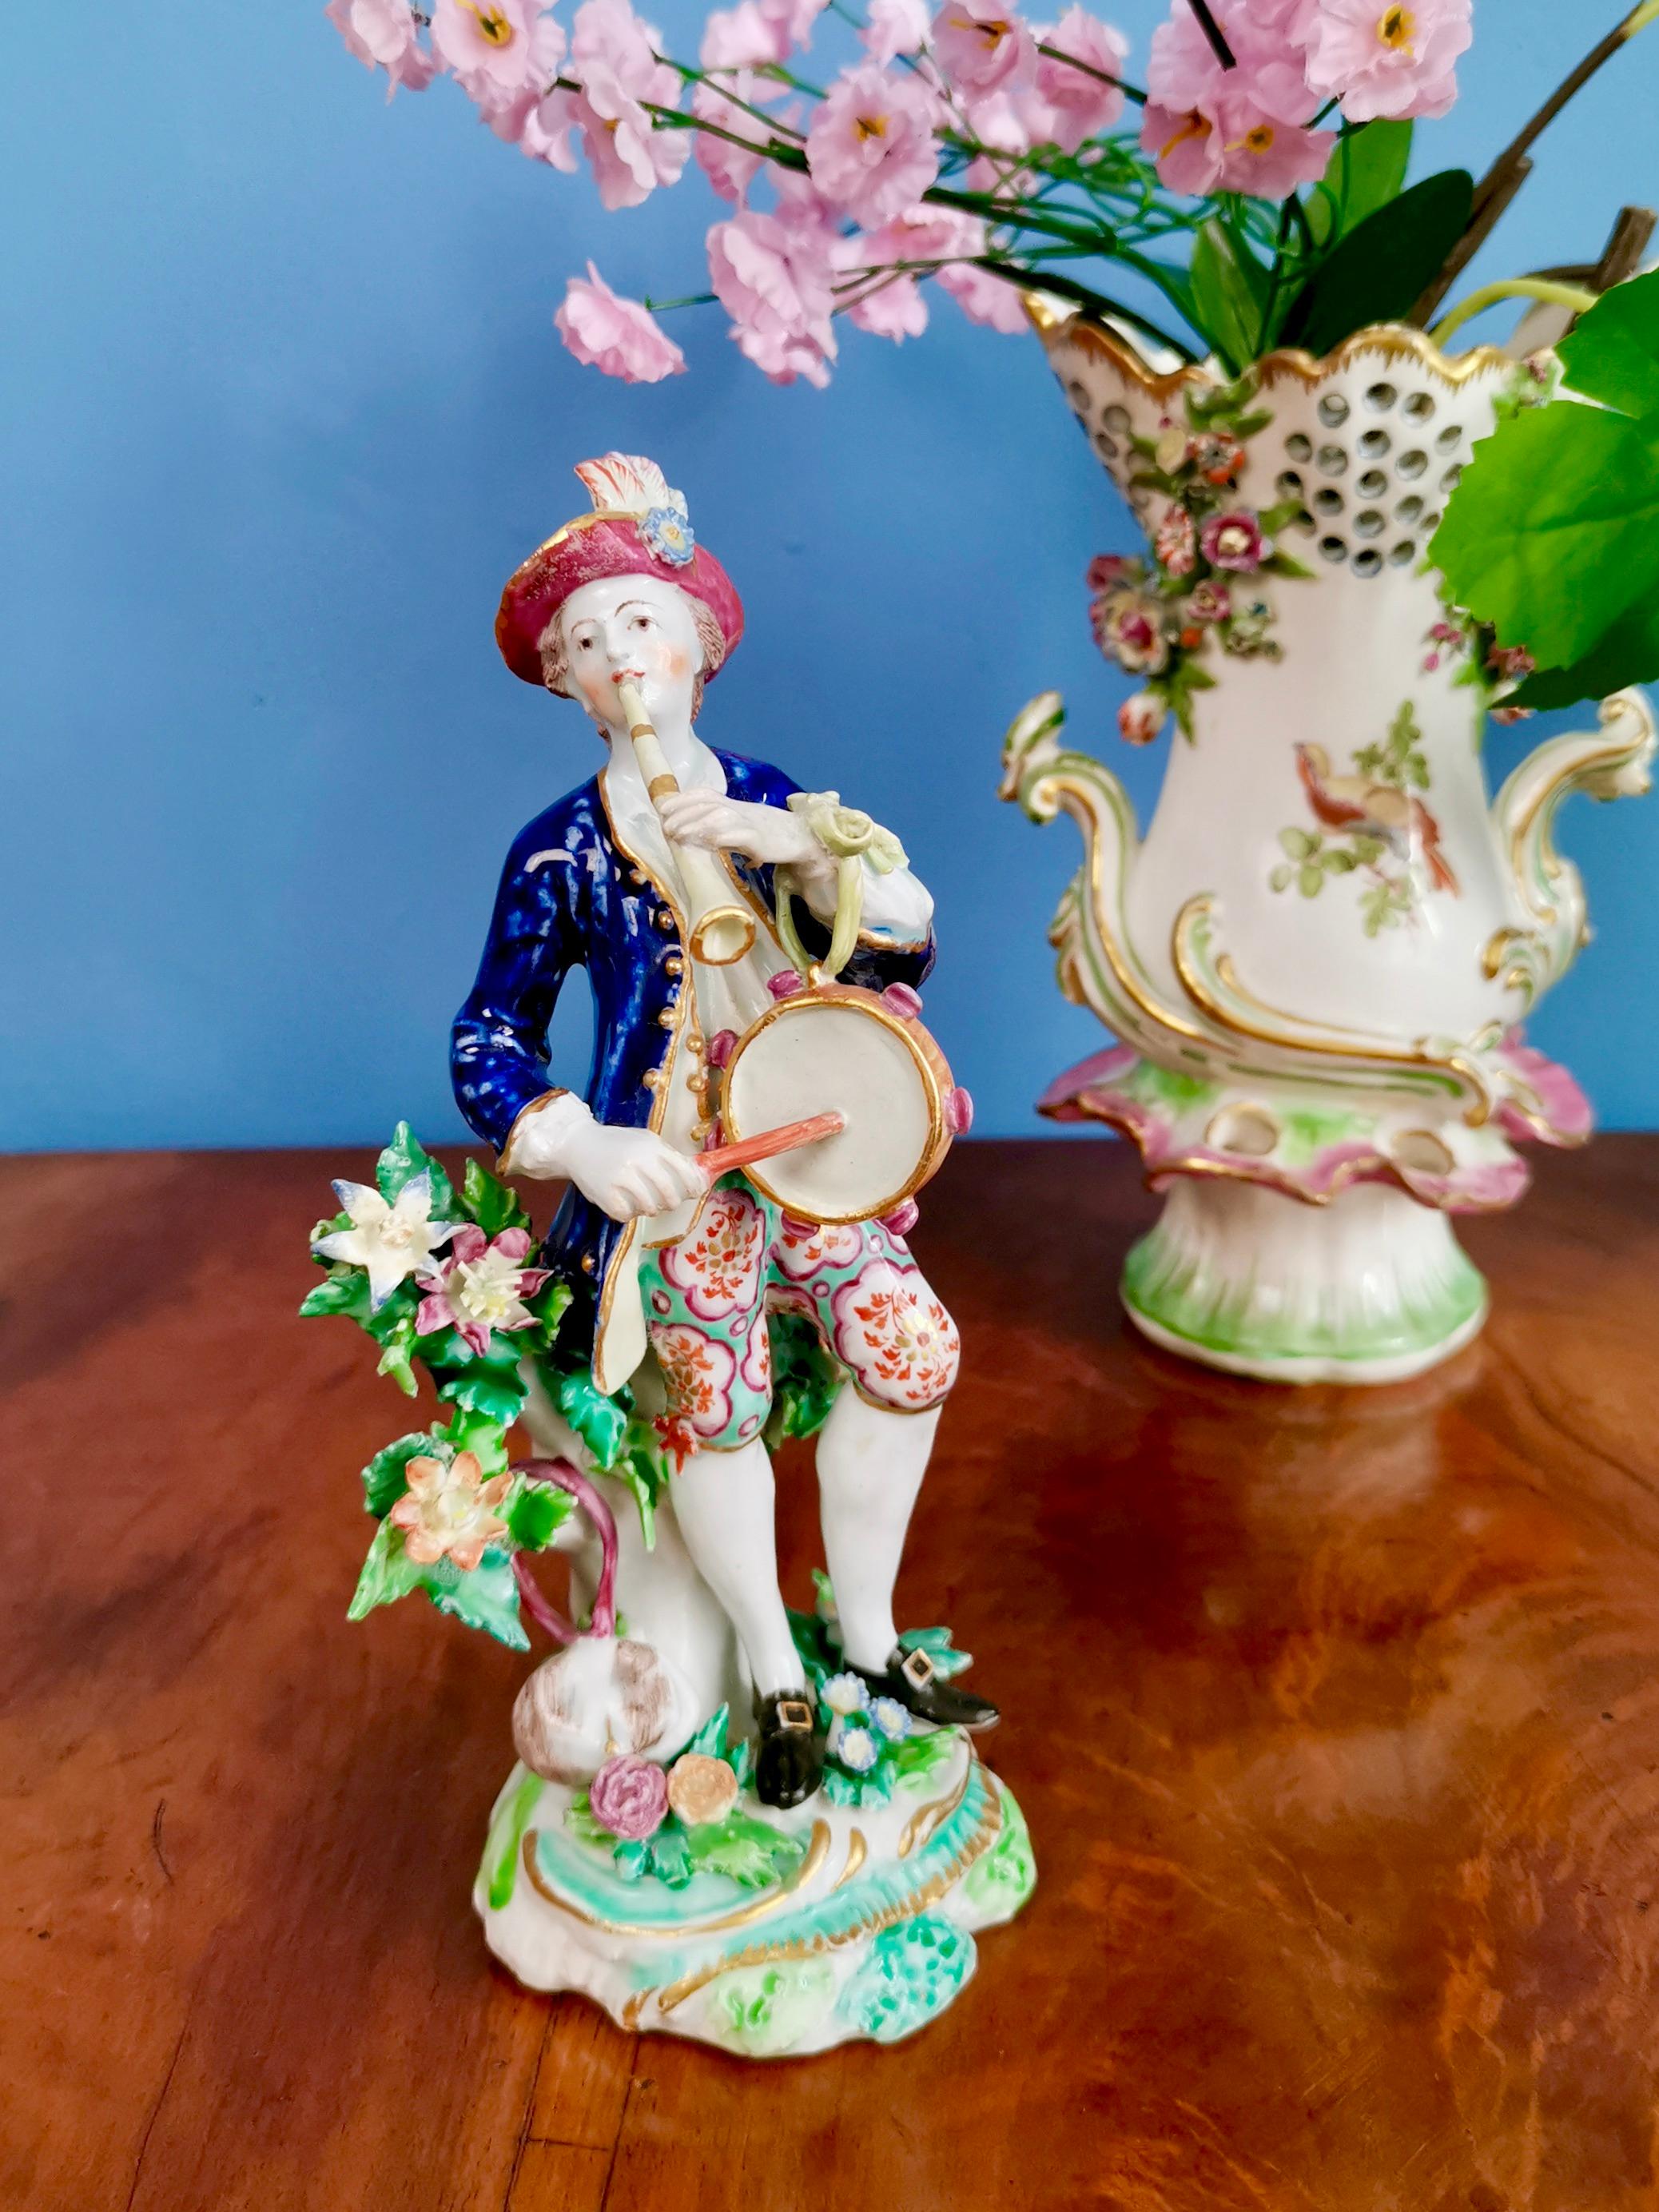 This is a wonderful figure of a musician made by the Bow Porcelain factory in circa 1760.

The Bow Porcelain Factory was one of the first potteries in Britain to make soft paste porcelain, and most probably the very first to use bone ash, which